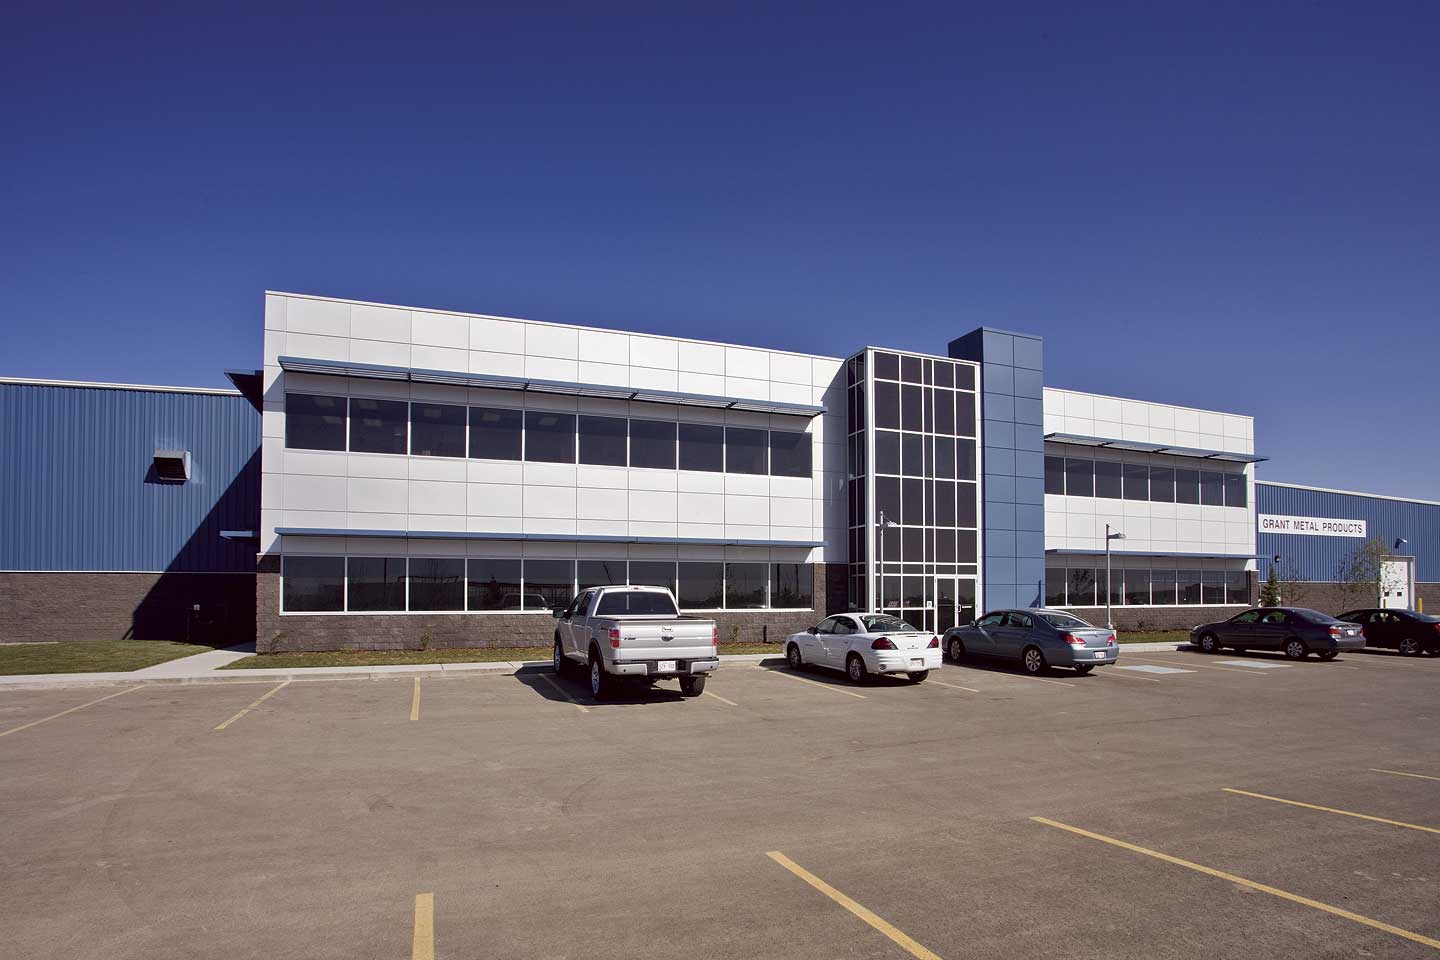 Grant Metal Products location